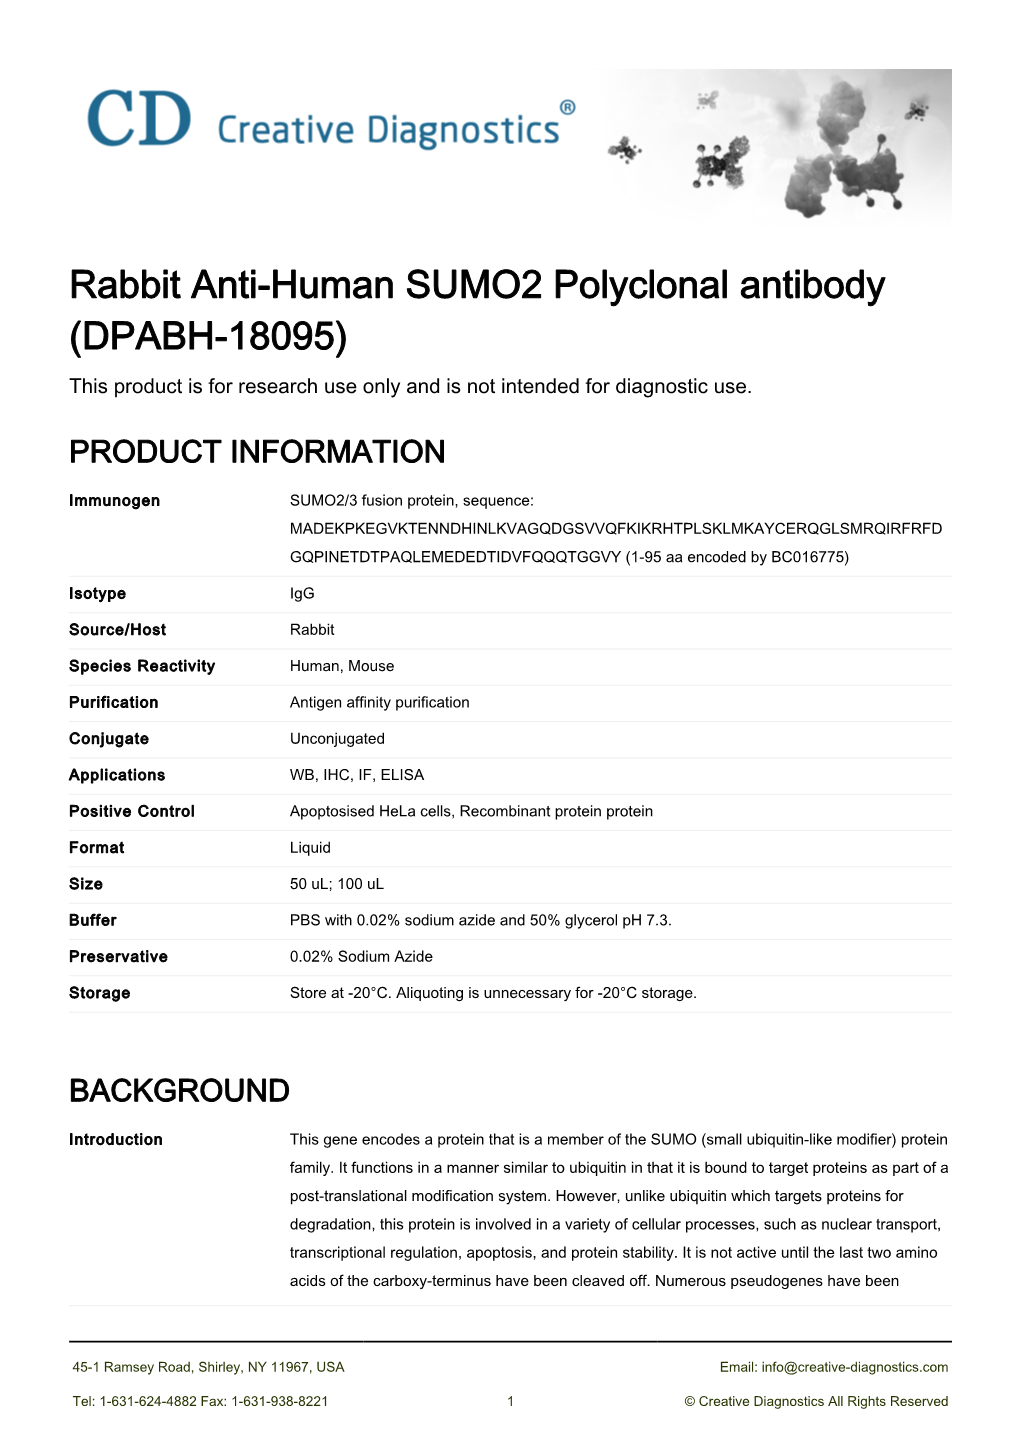 Rabbit Anti-Human SUMO2 Polyclonal Antibody (DPABH-18095) This Product Is for Research Use Only and Is Not Intended for Diagnostic Use